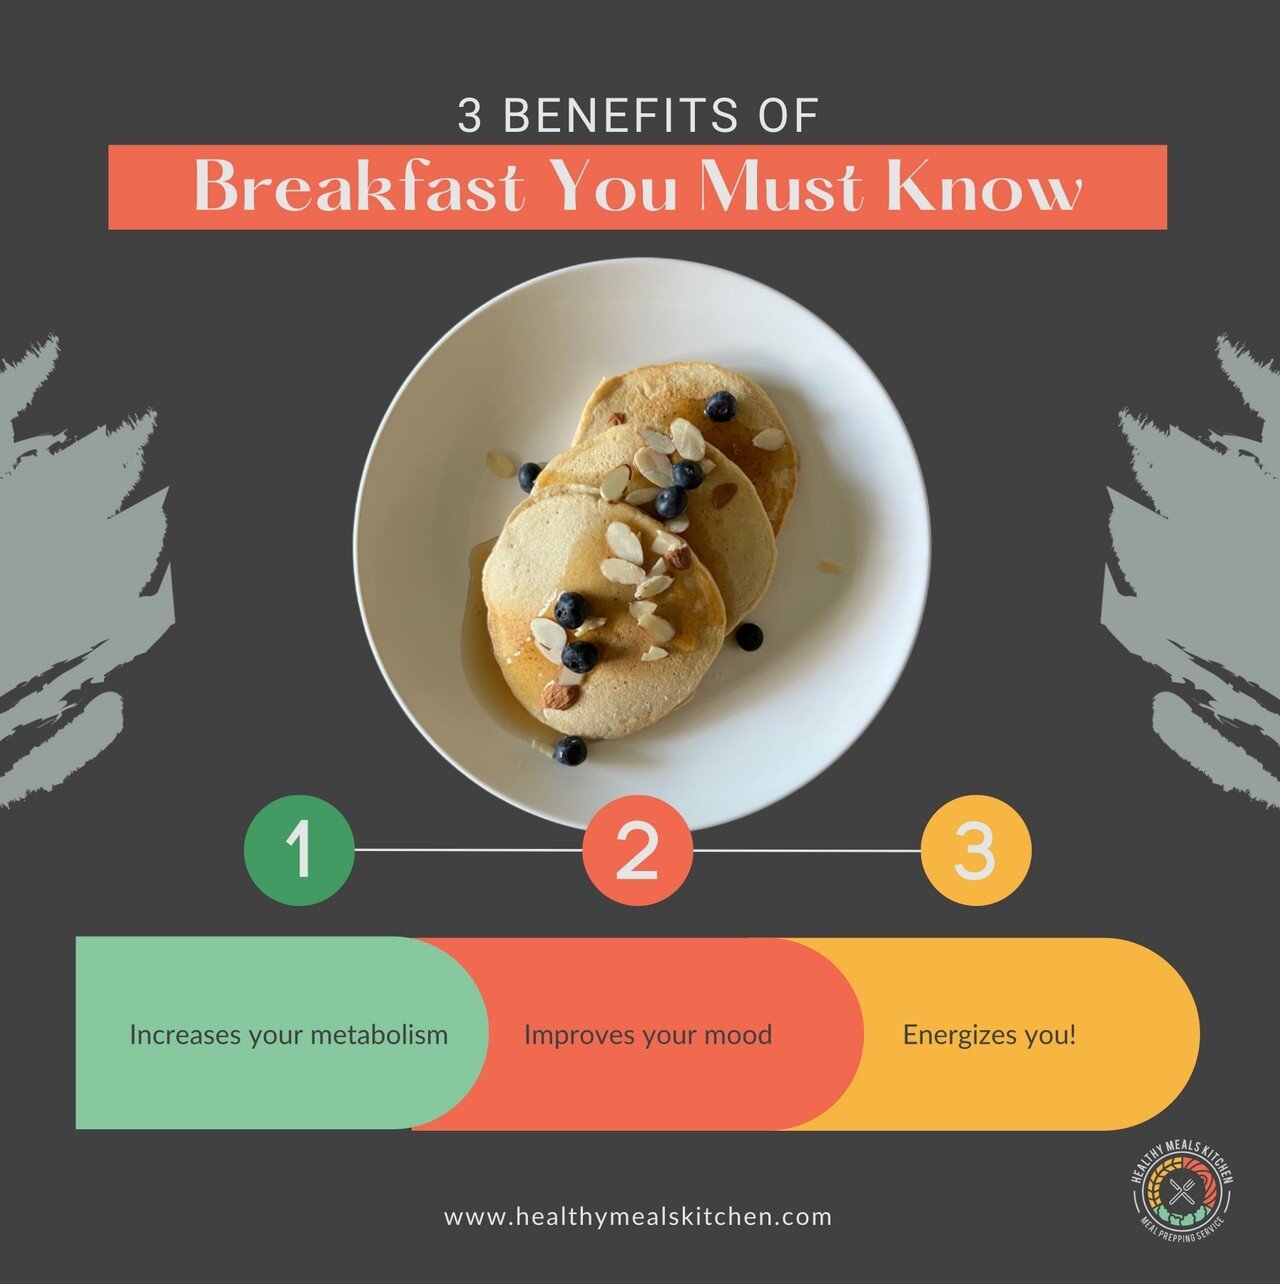 Start your day off the right way with a delicious breakfast! From boosting your metabolism to improving your cognitive function, breakfast truly is the most important meal of the day 🌅🍳 #breakfast #healthymeals #morningmotivation